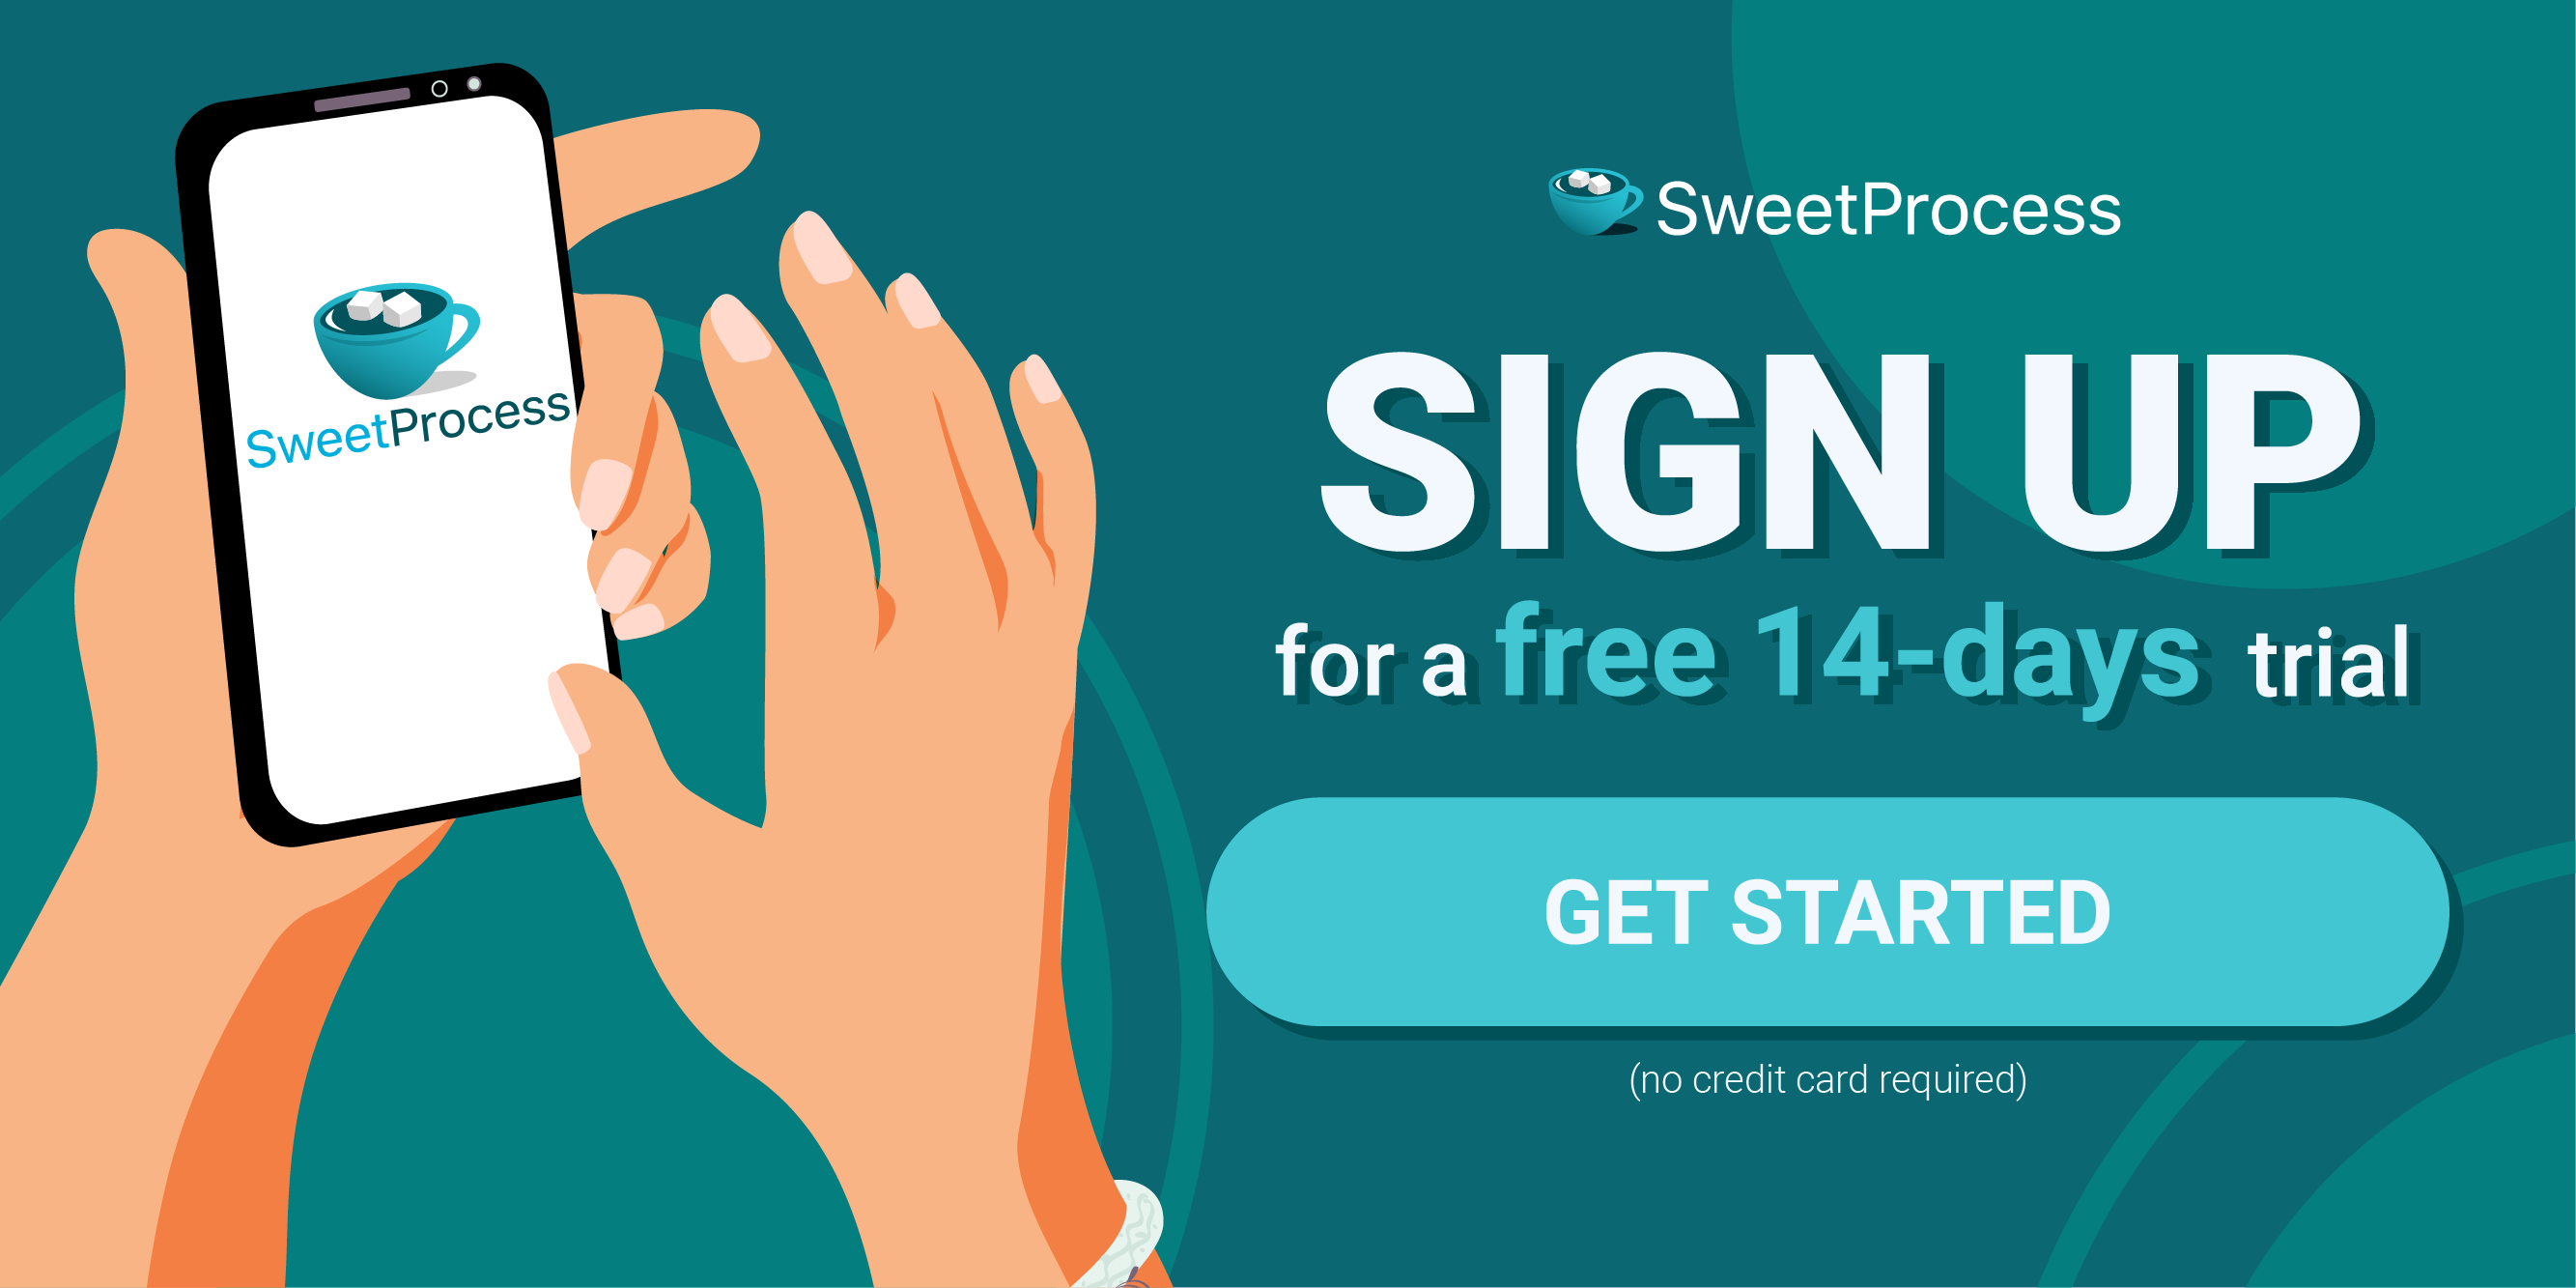 sign up for a 14-day free trial of sweetprocess